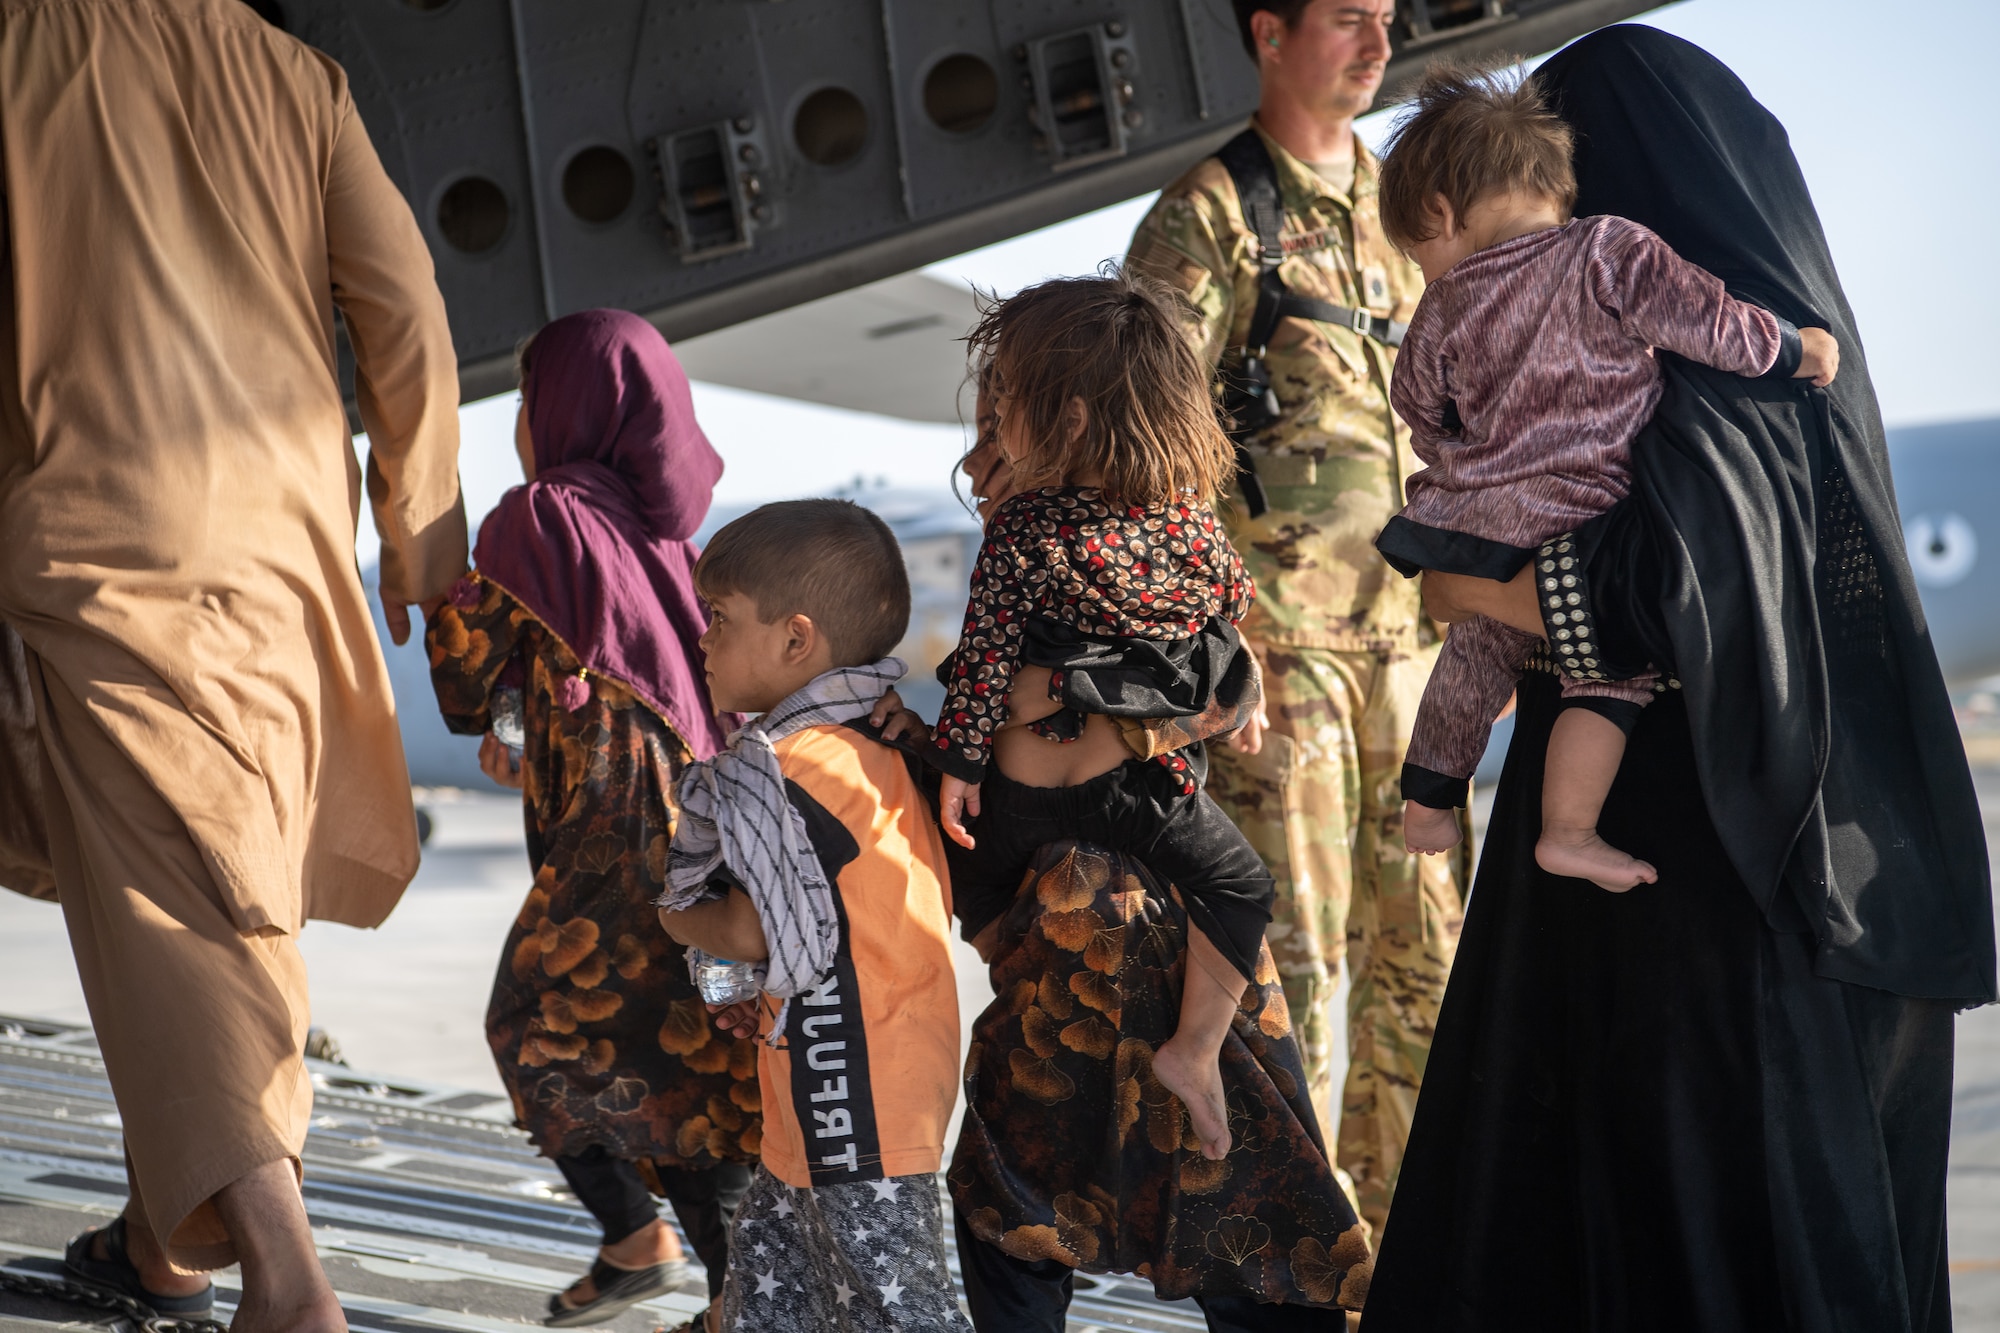 U.S. Air Force loadmasters and pilots assigned to the 816th Expeditionary Airlift Squadron, load passengers aboard a U.S. Air Force C-17 Globemaster III in support of the Afghanistan evacuation at Hamid Karzai International Airport (HKIA), Afghanistan, Aug. 24, 2021.